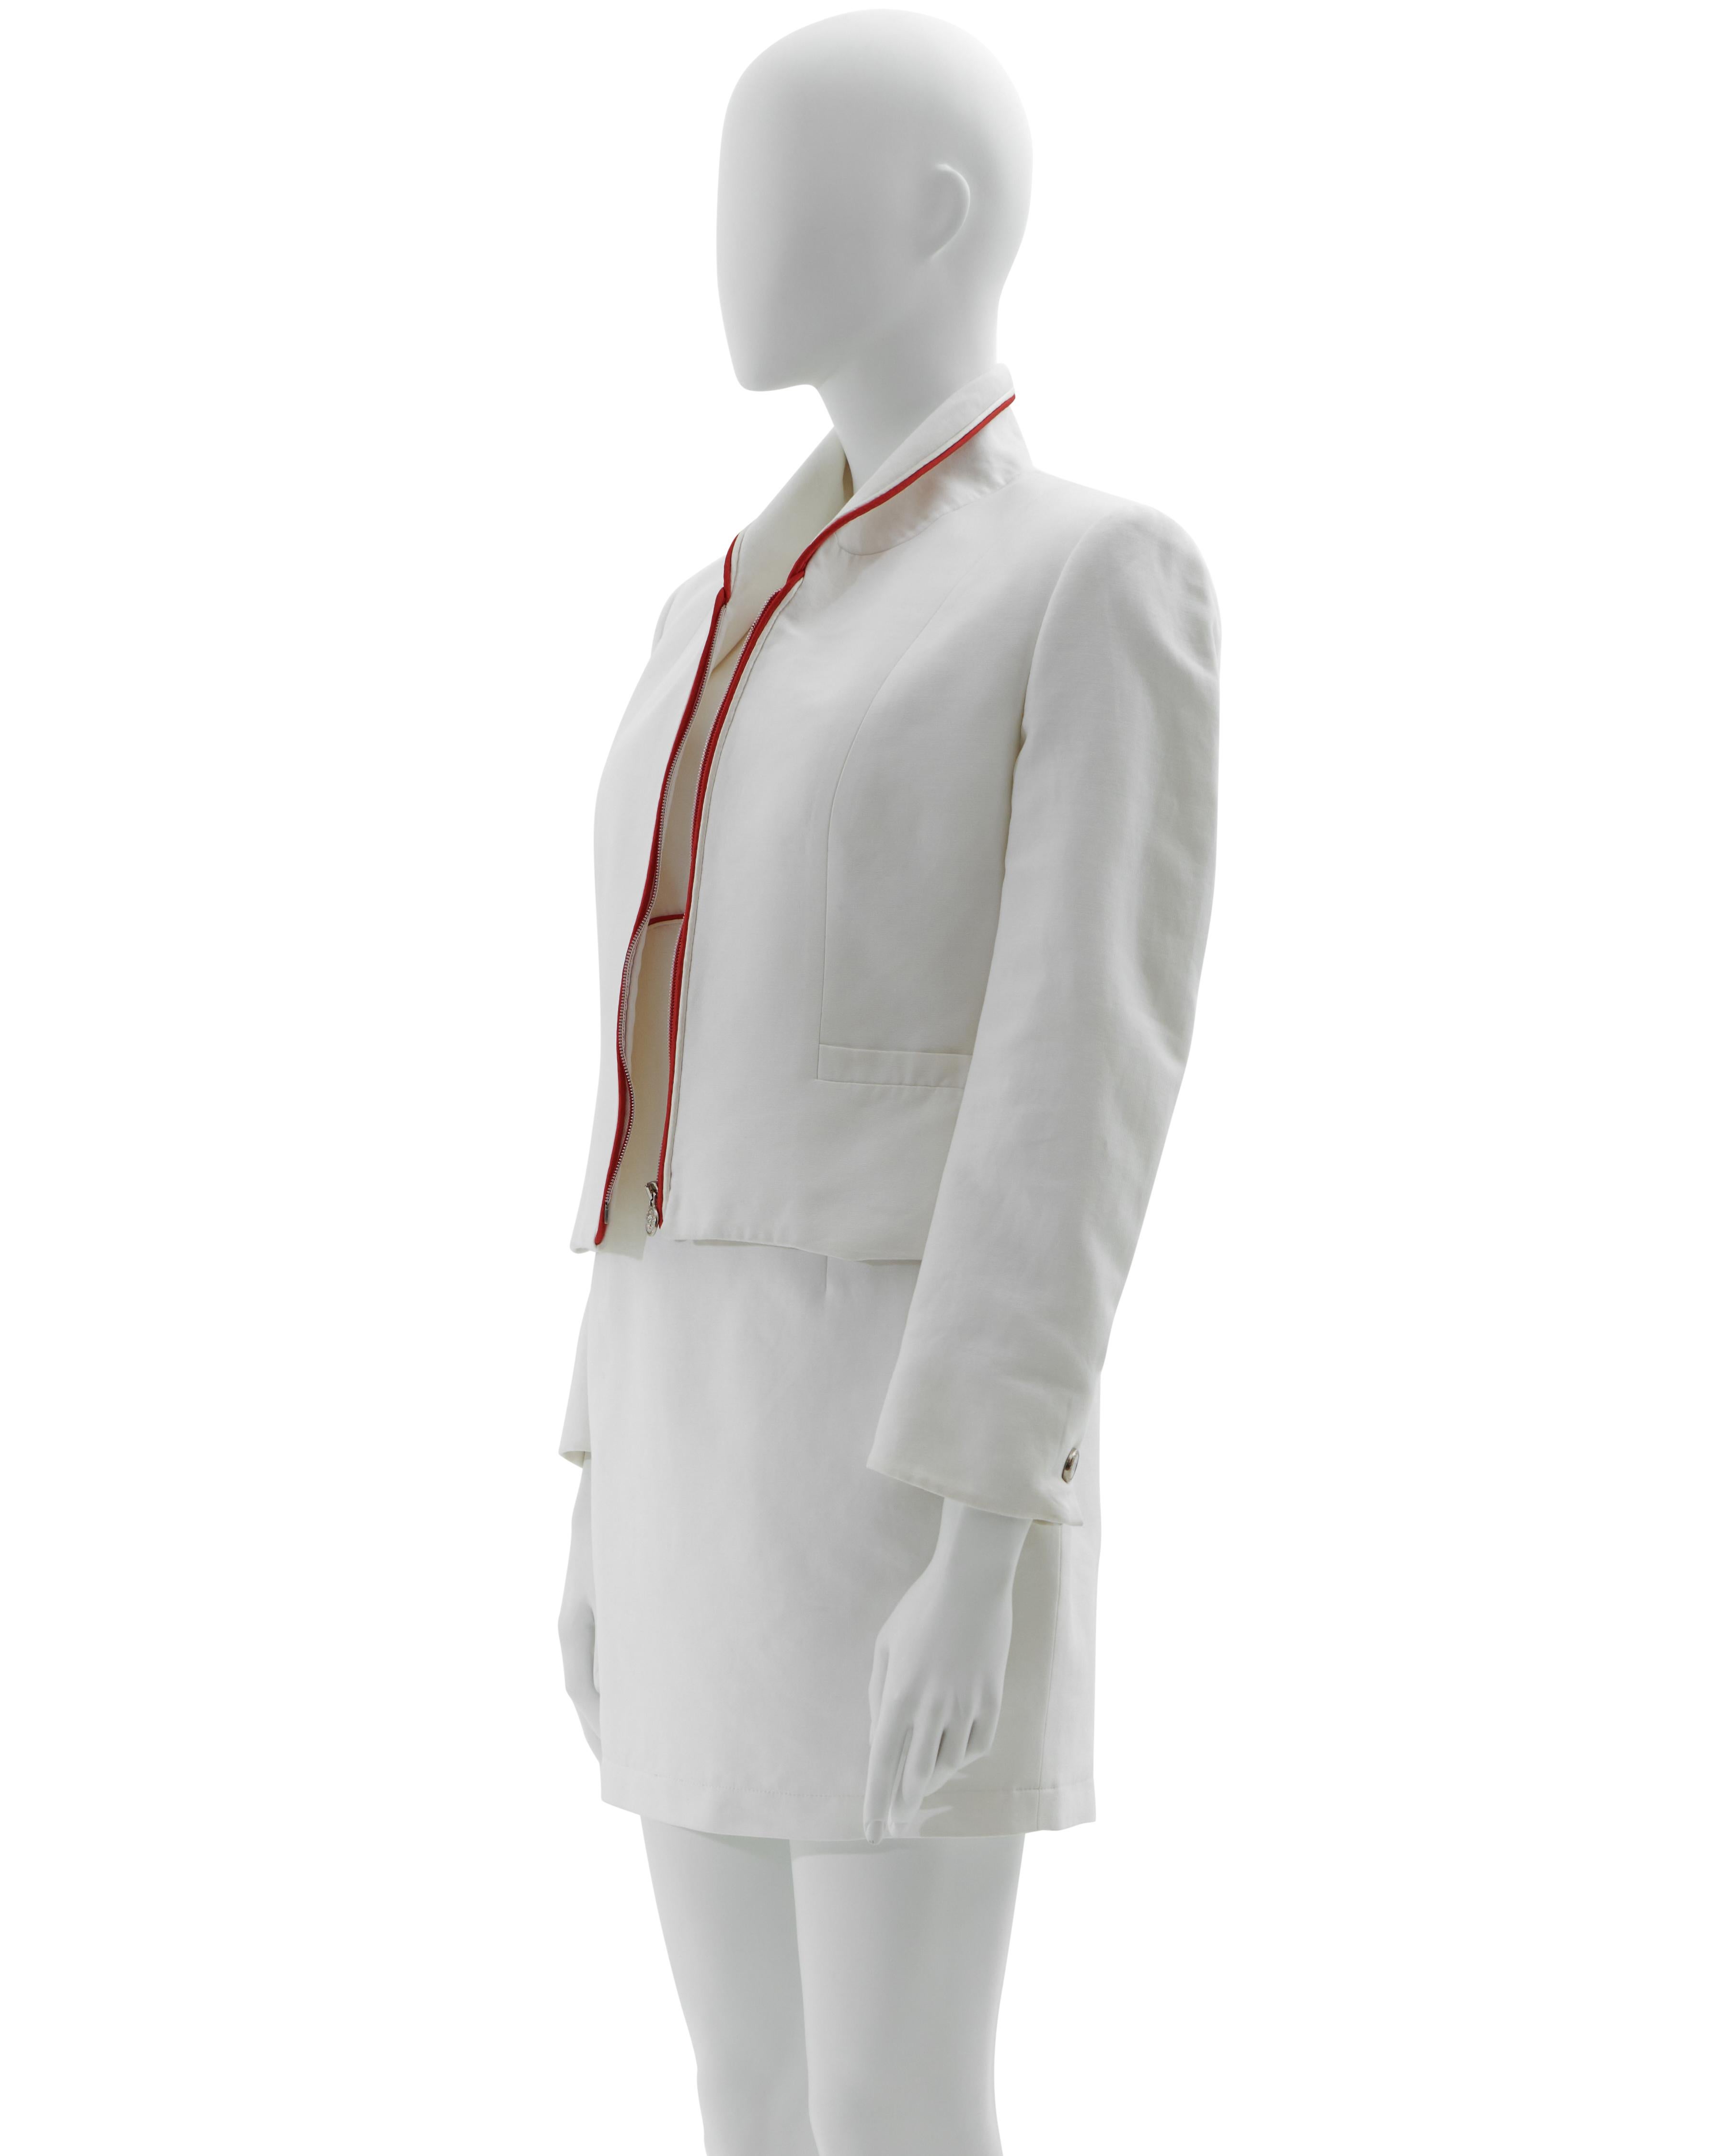 - Early 1990s 
- Sold by Skof.Archive
- Designed by Gianni Versace
- Versus by Gianni Versace
- White cotton with red profile jacket and dress set
- Medusa zip front detail on the jacket
- Dress back hidden zipper closure
- Snap Jacket buttons 
-